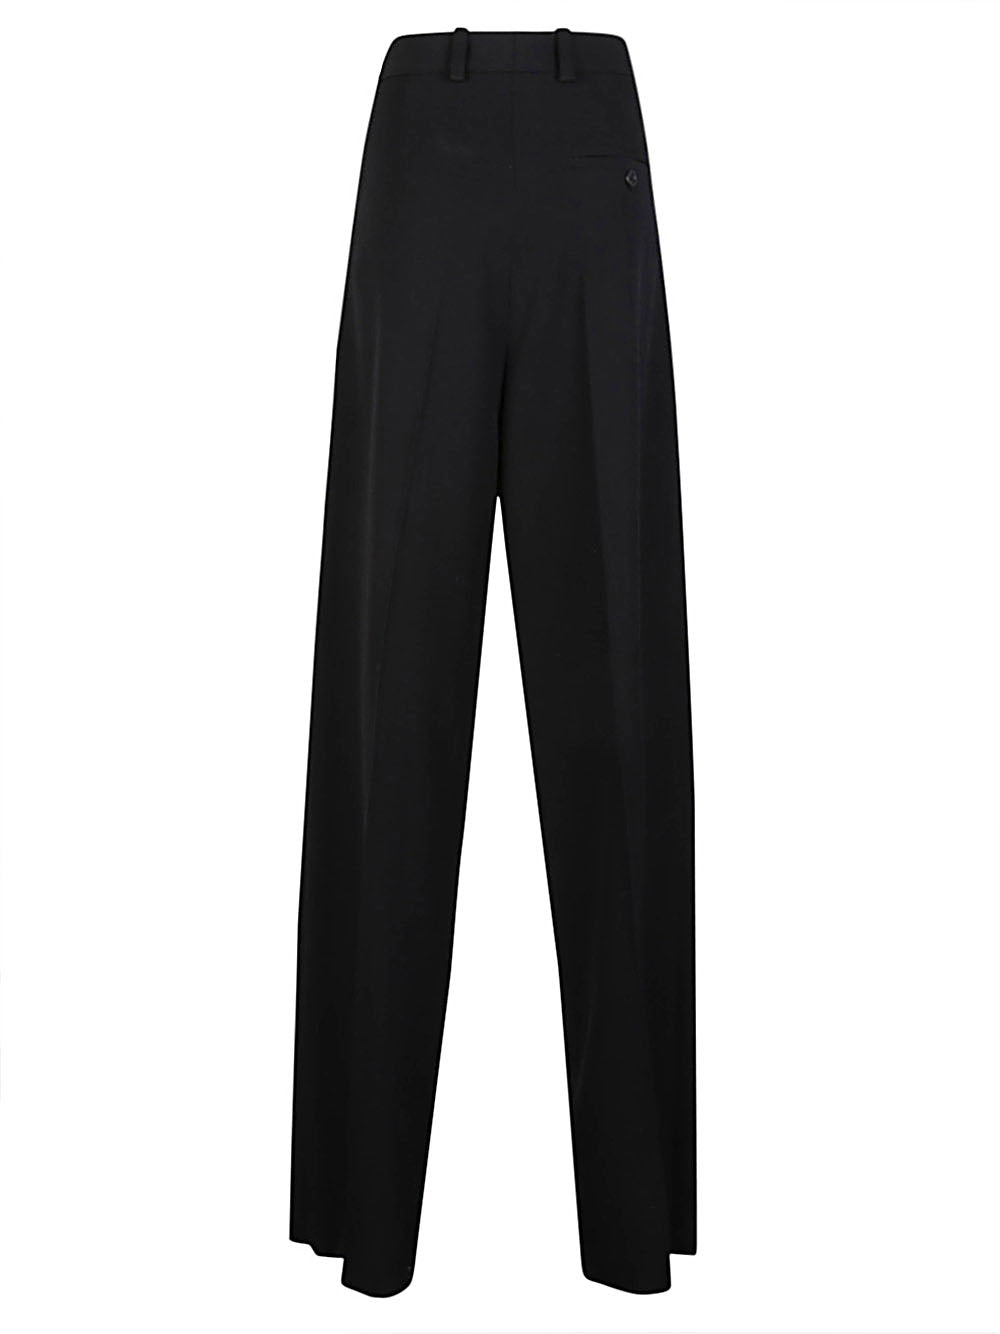 Women's Black Tailored Trousers for FW23